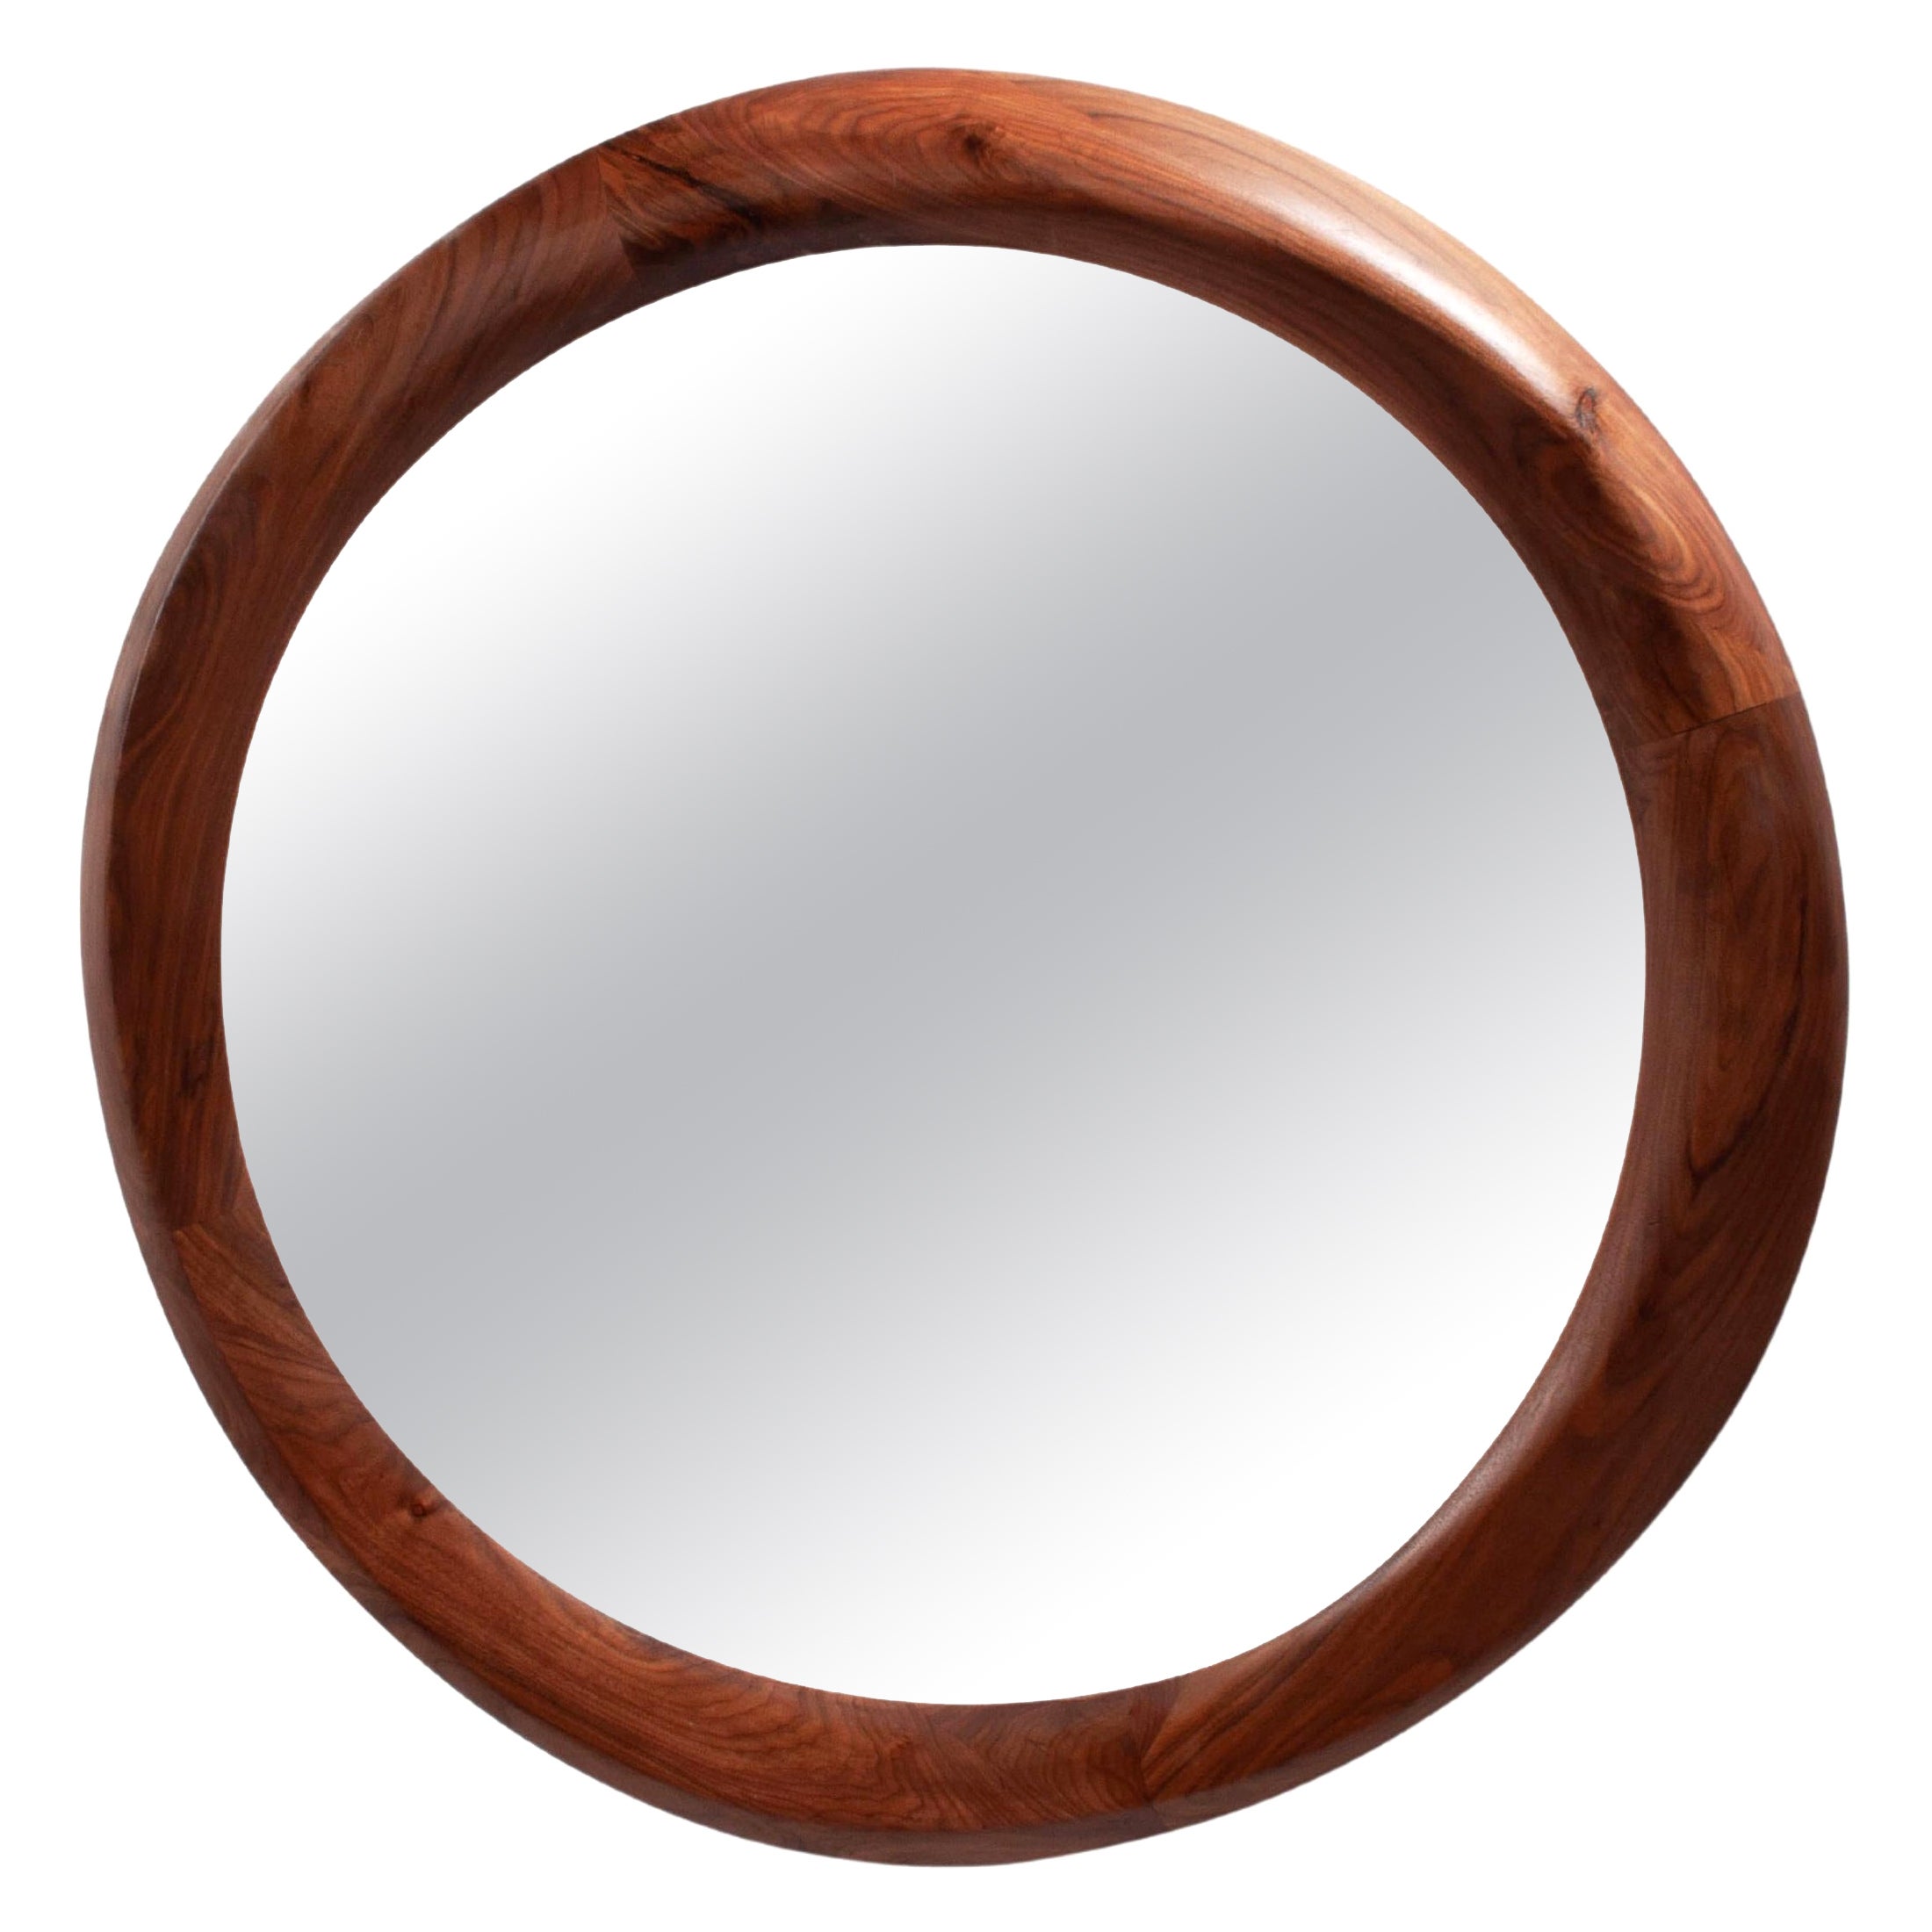 Amorph Contemporary Chiara Mirror Solid Walnut Wood Natural Stain For Sale